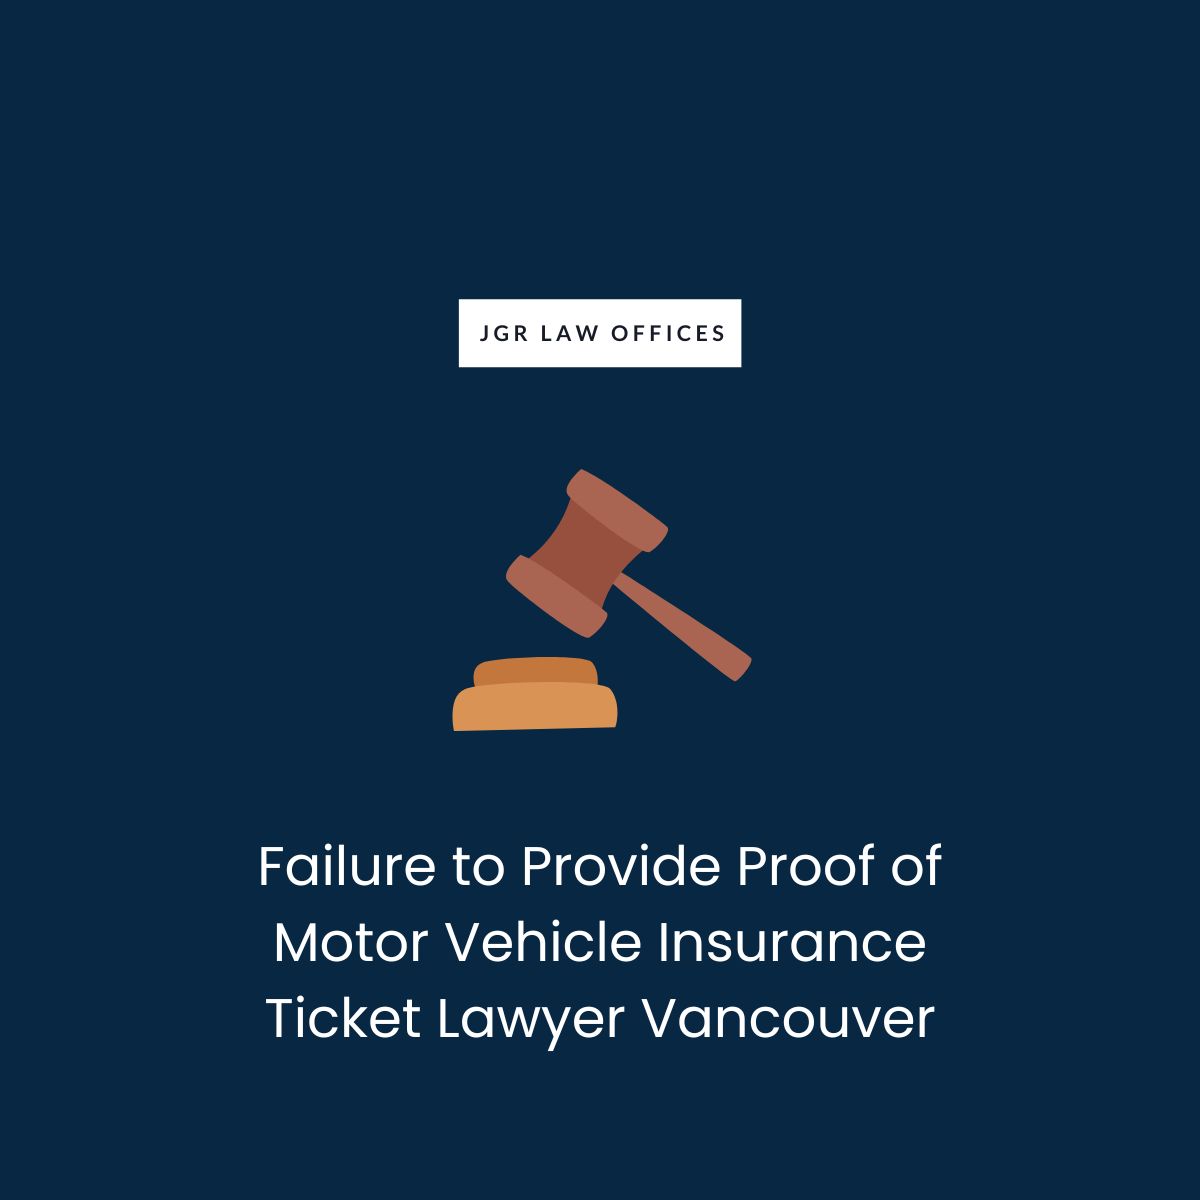 Failure to Provide Proof of Motor Vehicle Insurance Ticket Attorney Vancouver Failure to Provide Proof of Motor Vehicle Insurance Failure to Provide Proof of Motor Vehicle Insurance